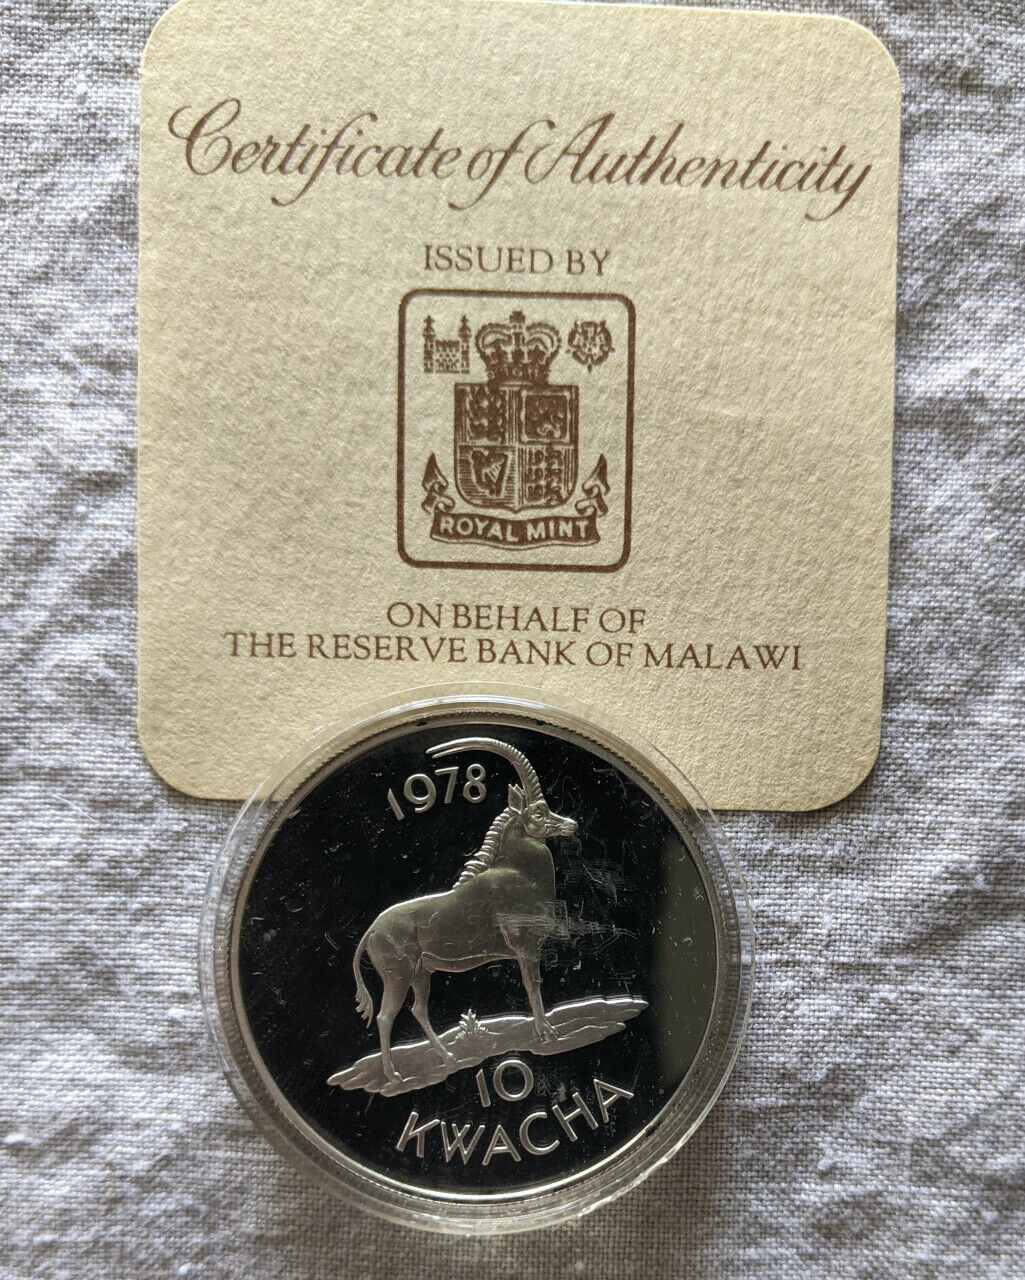 1978 Malawi 10 Kwacha Wwf Conservation Sable Antelope Proof Silver Coin